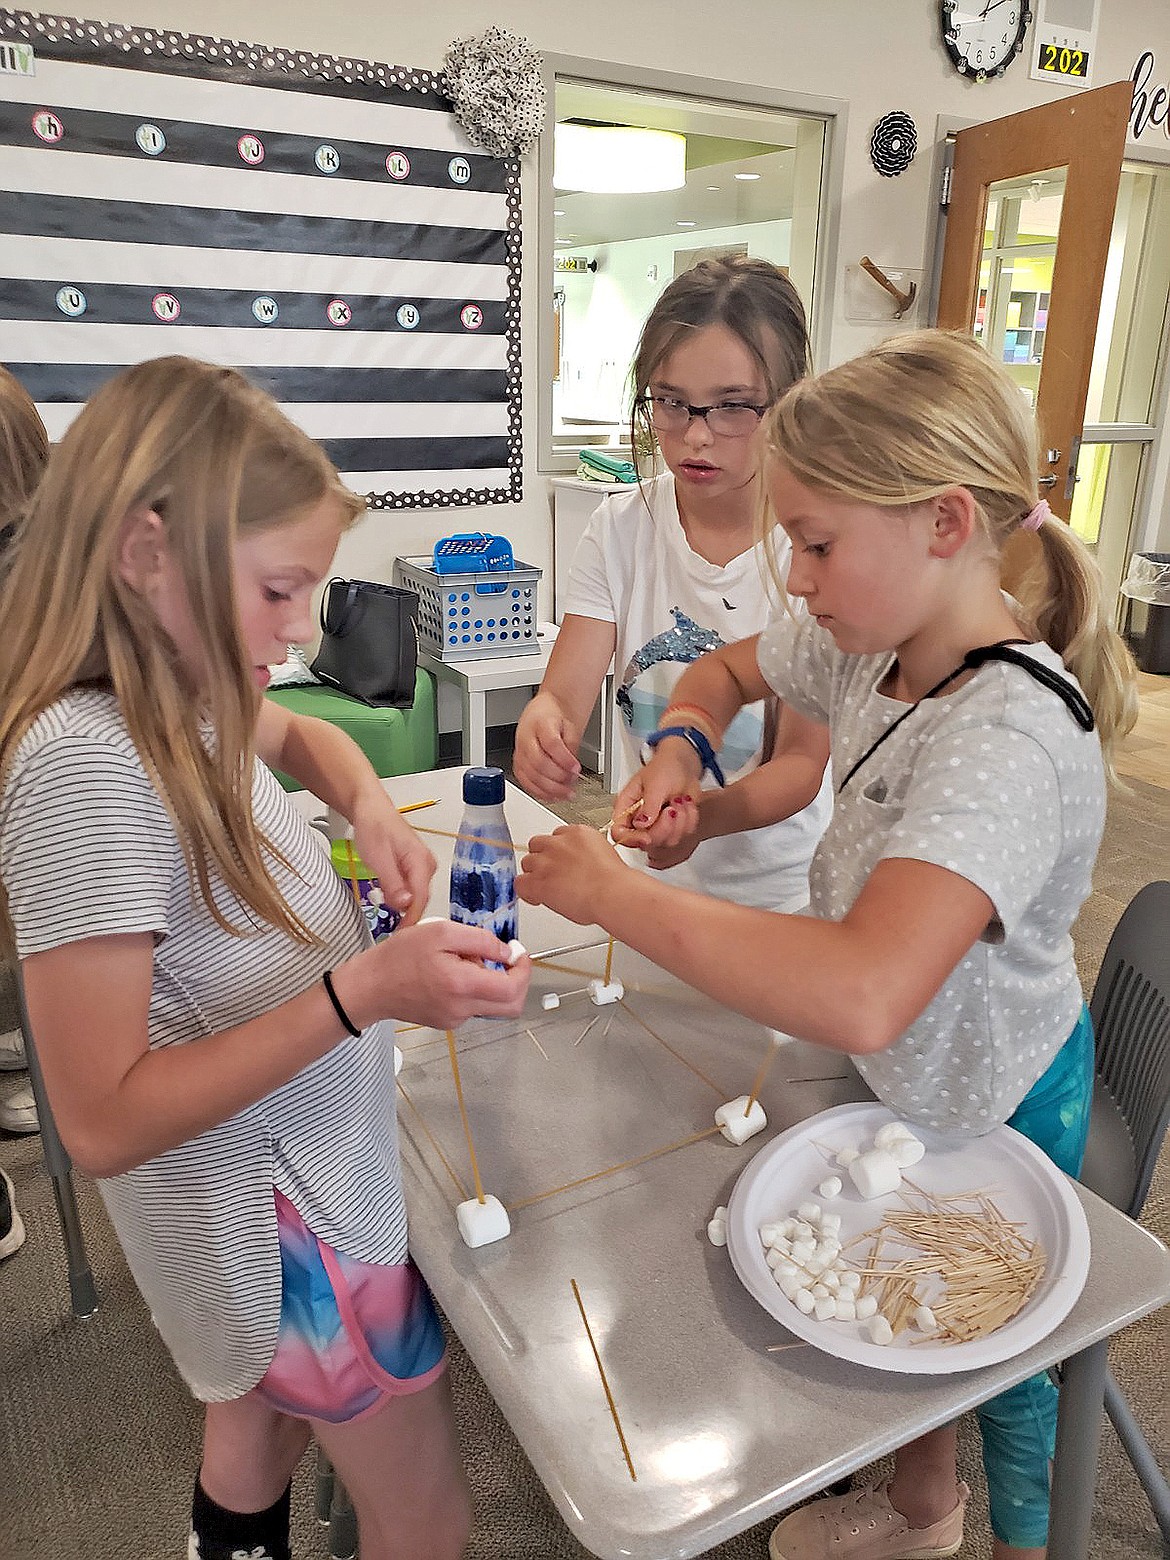 Whitefish students, from left to right, Harper Dauenhauer, Jewel Myers and Isabella Brooks work together in a hands-on project during the Whitefish Summer Learning Program in July at Muldown Elementary School. (Courtesy photo)